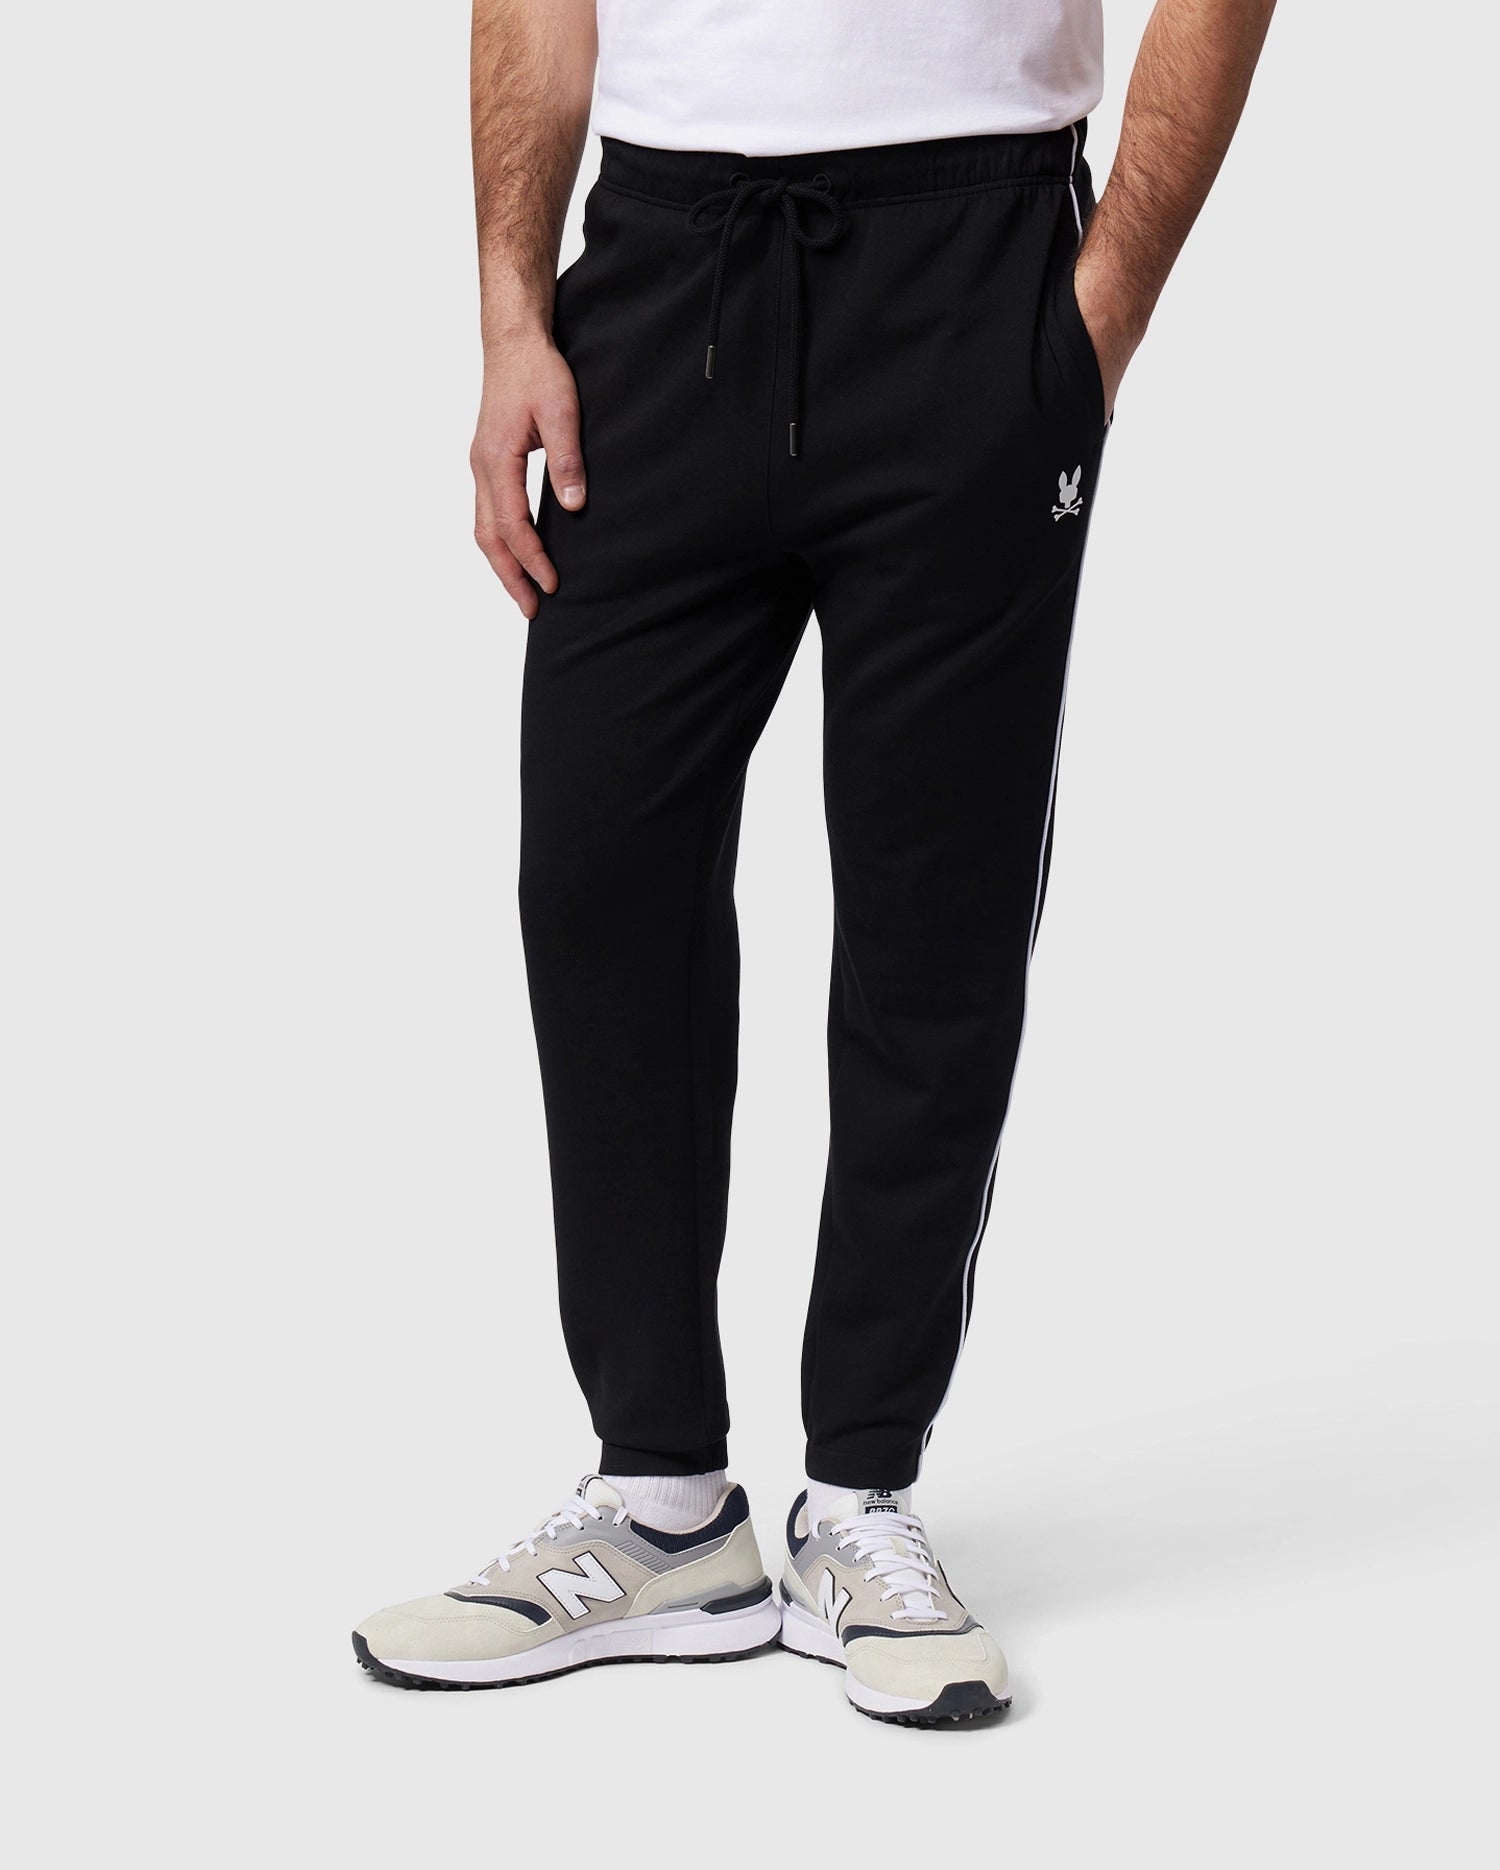 A person wearing a pair of Psycho Bunny MENS LEON REGULAR FIT SWEATPANTS - B6P289B200 in black with a white stripe and logo on the side, paired with light gray and white sneakers. Only the lower half of the person's body is visible.